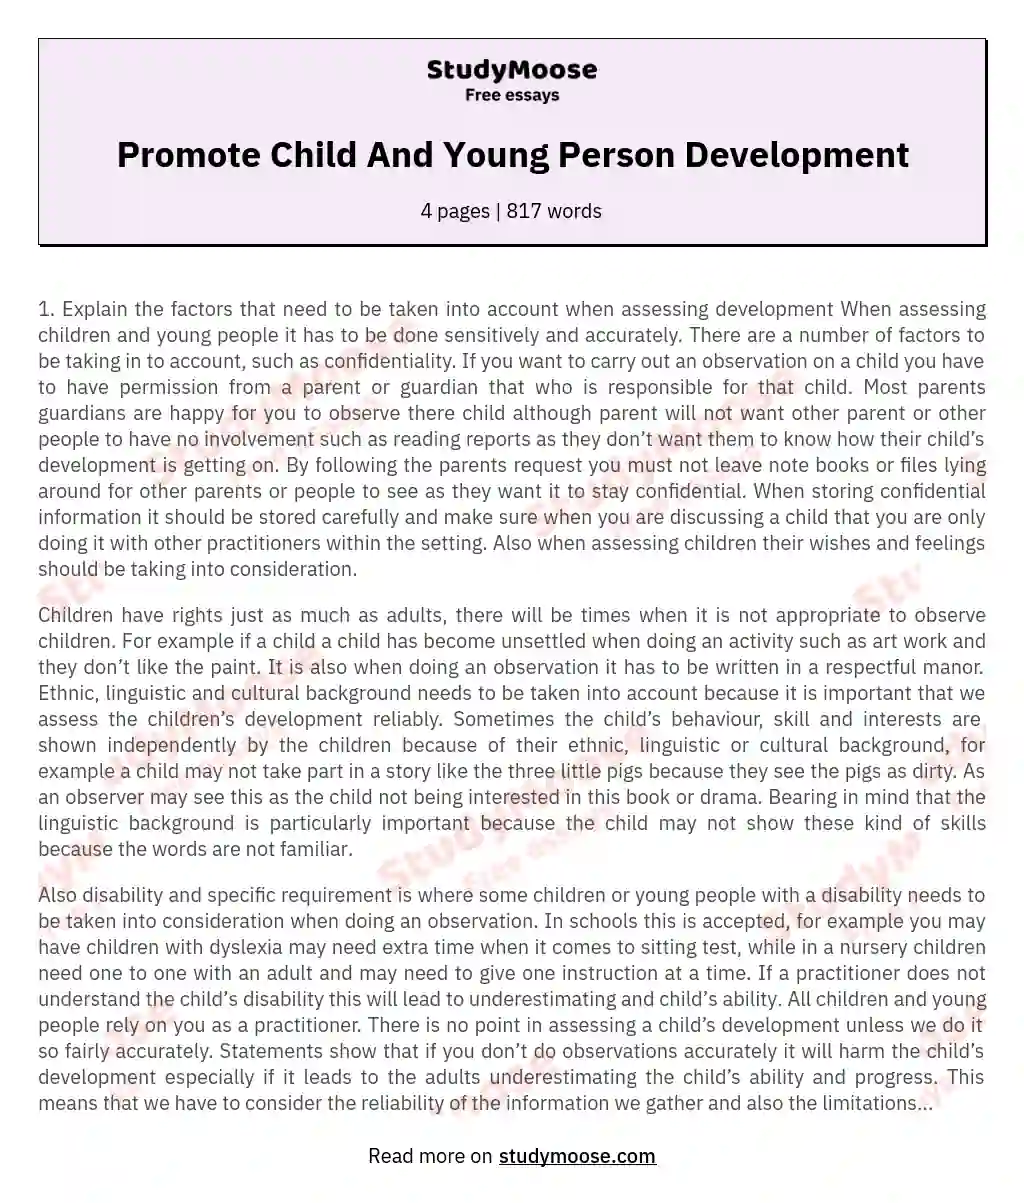 Promote Child And Young Person Development essay